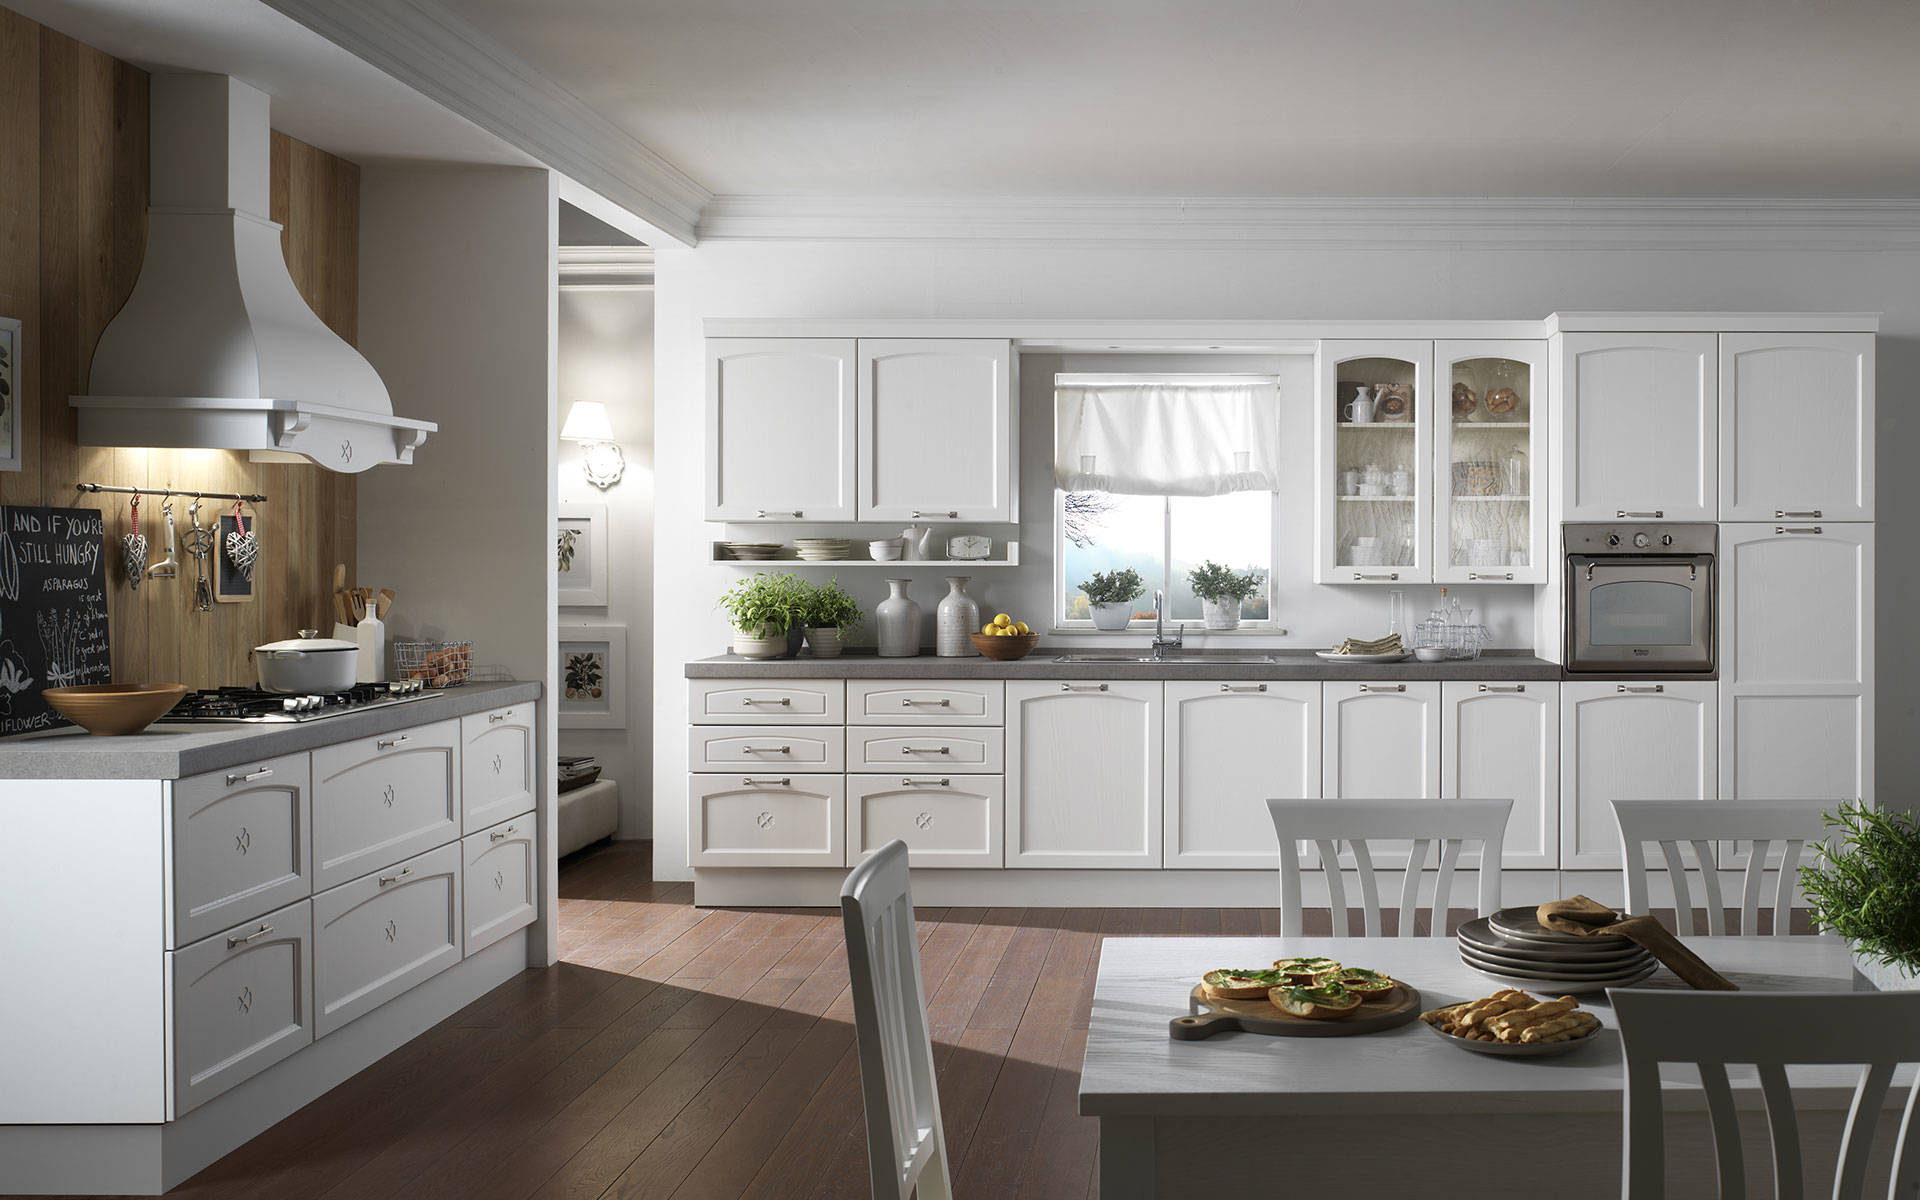 Classical kitchens
